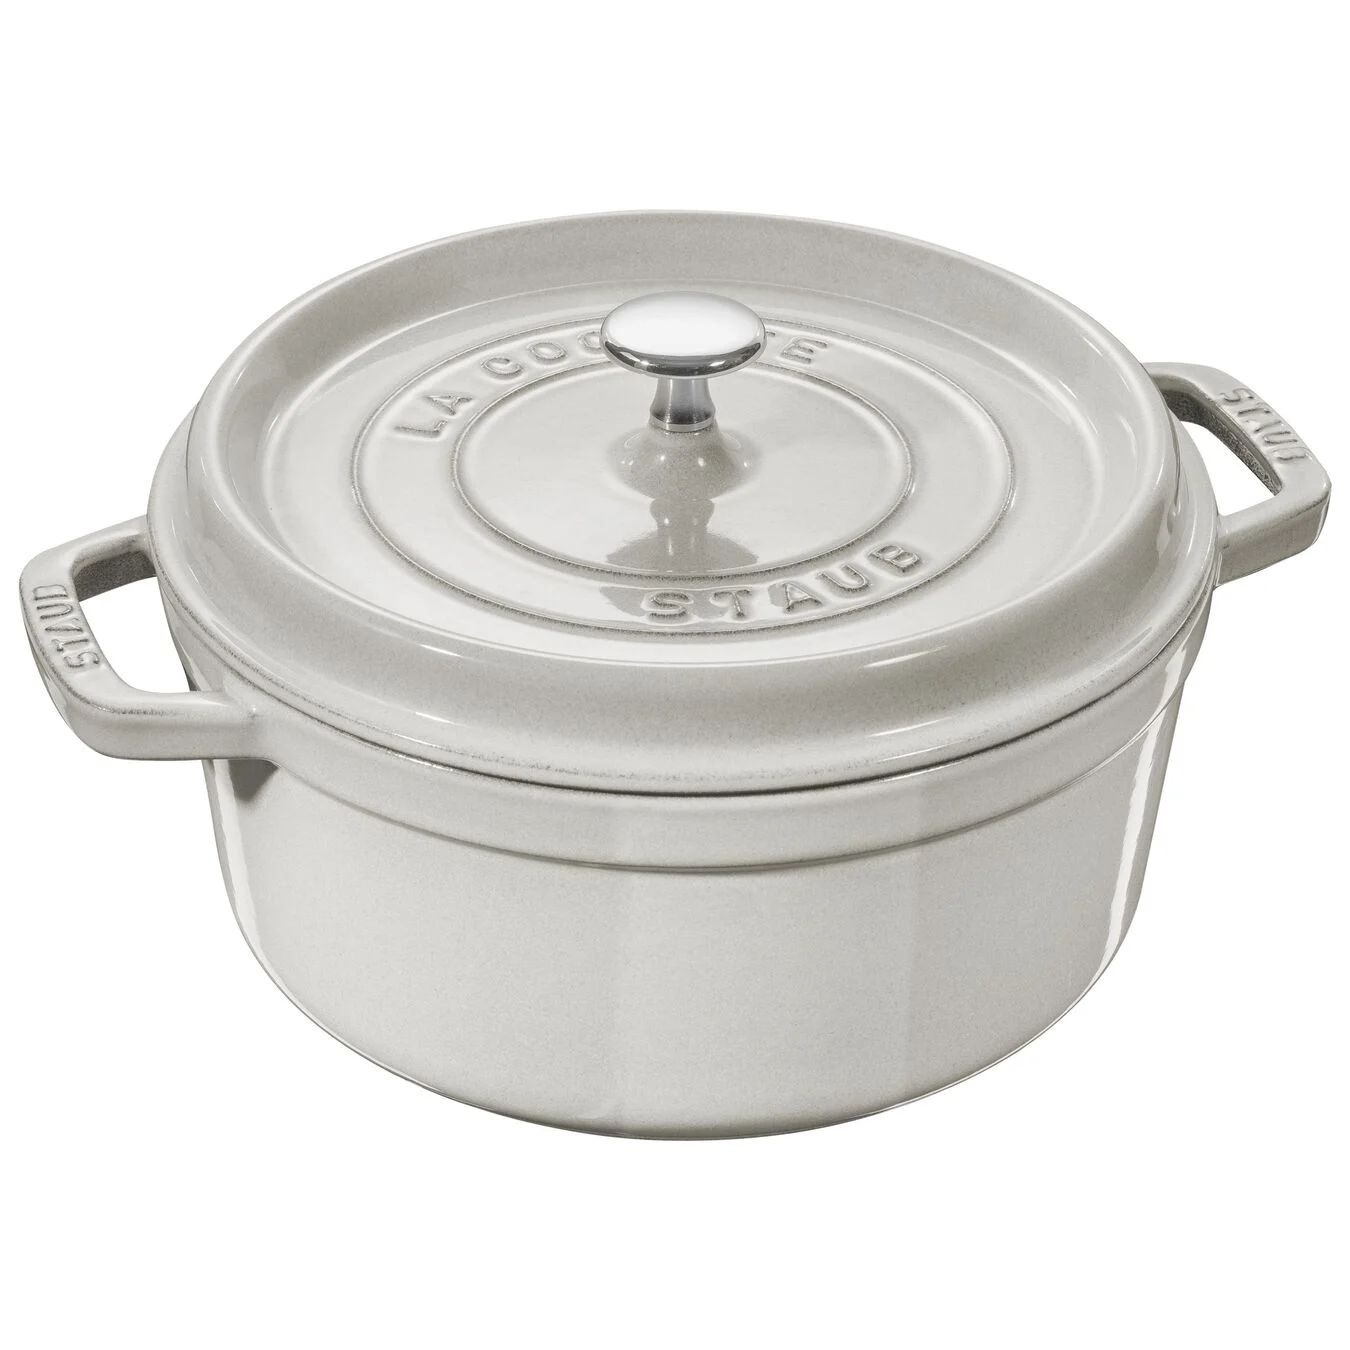 5.5 qt, round, Cocotte, white truffle | The ZWILLING Group Cutlery & Cookware